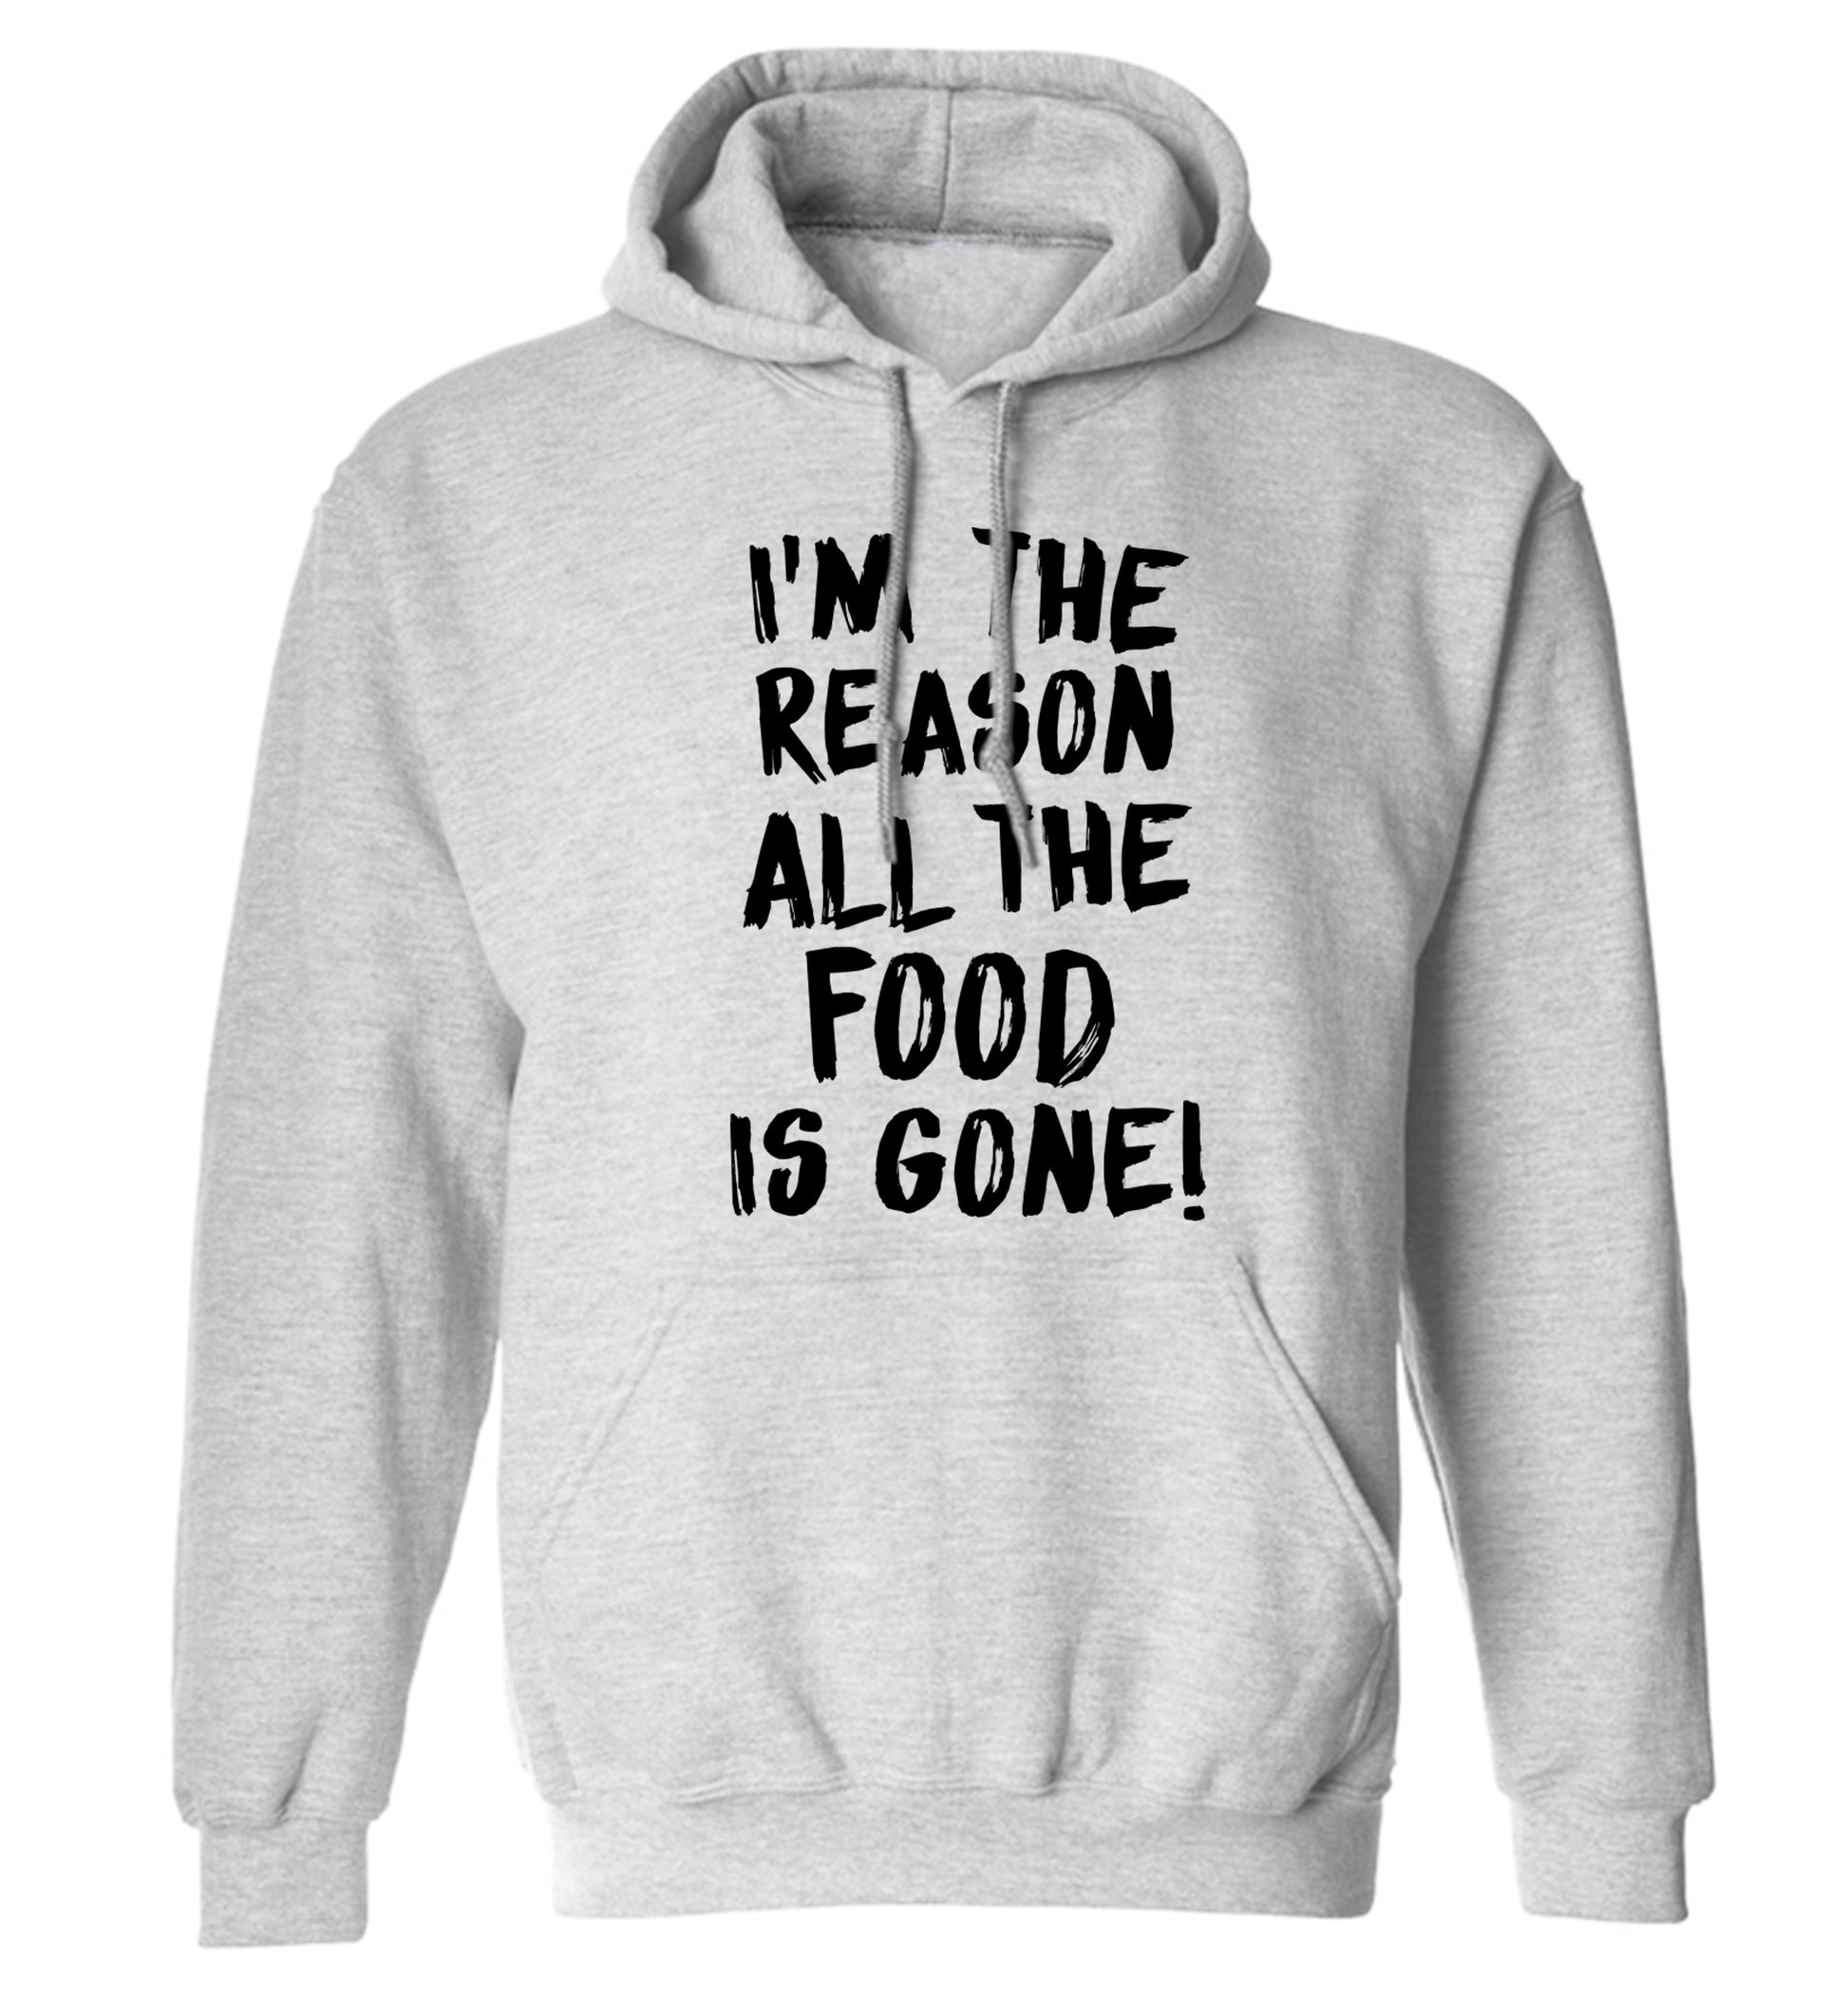 I'm the reason why all the food is gone adults unisex grey hoodie 2XL